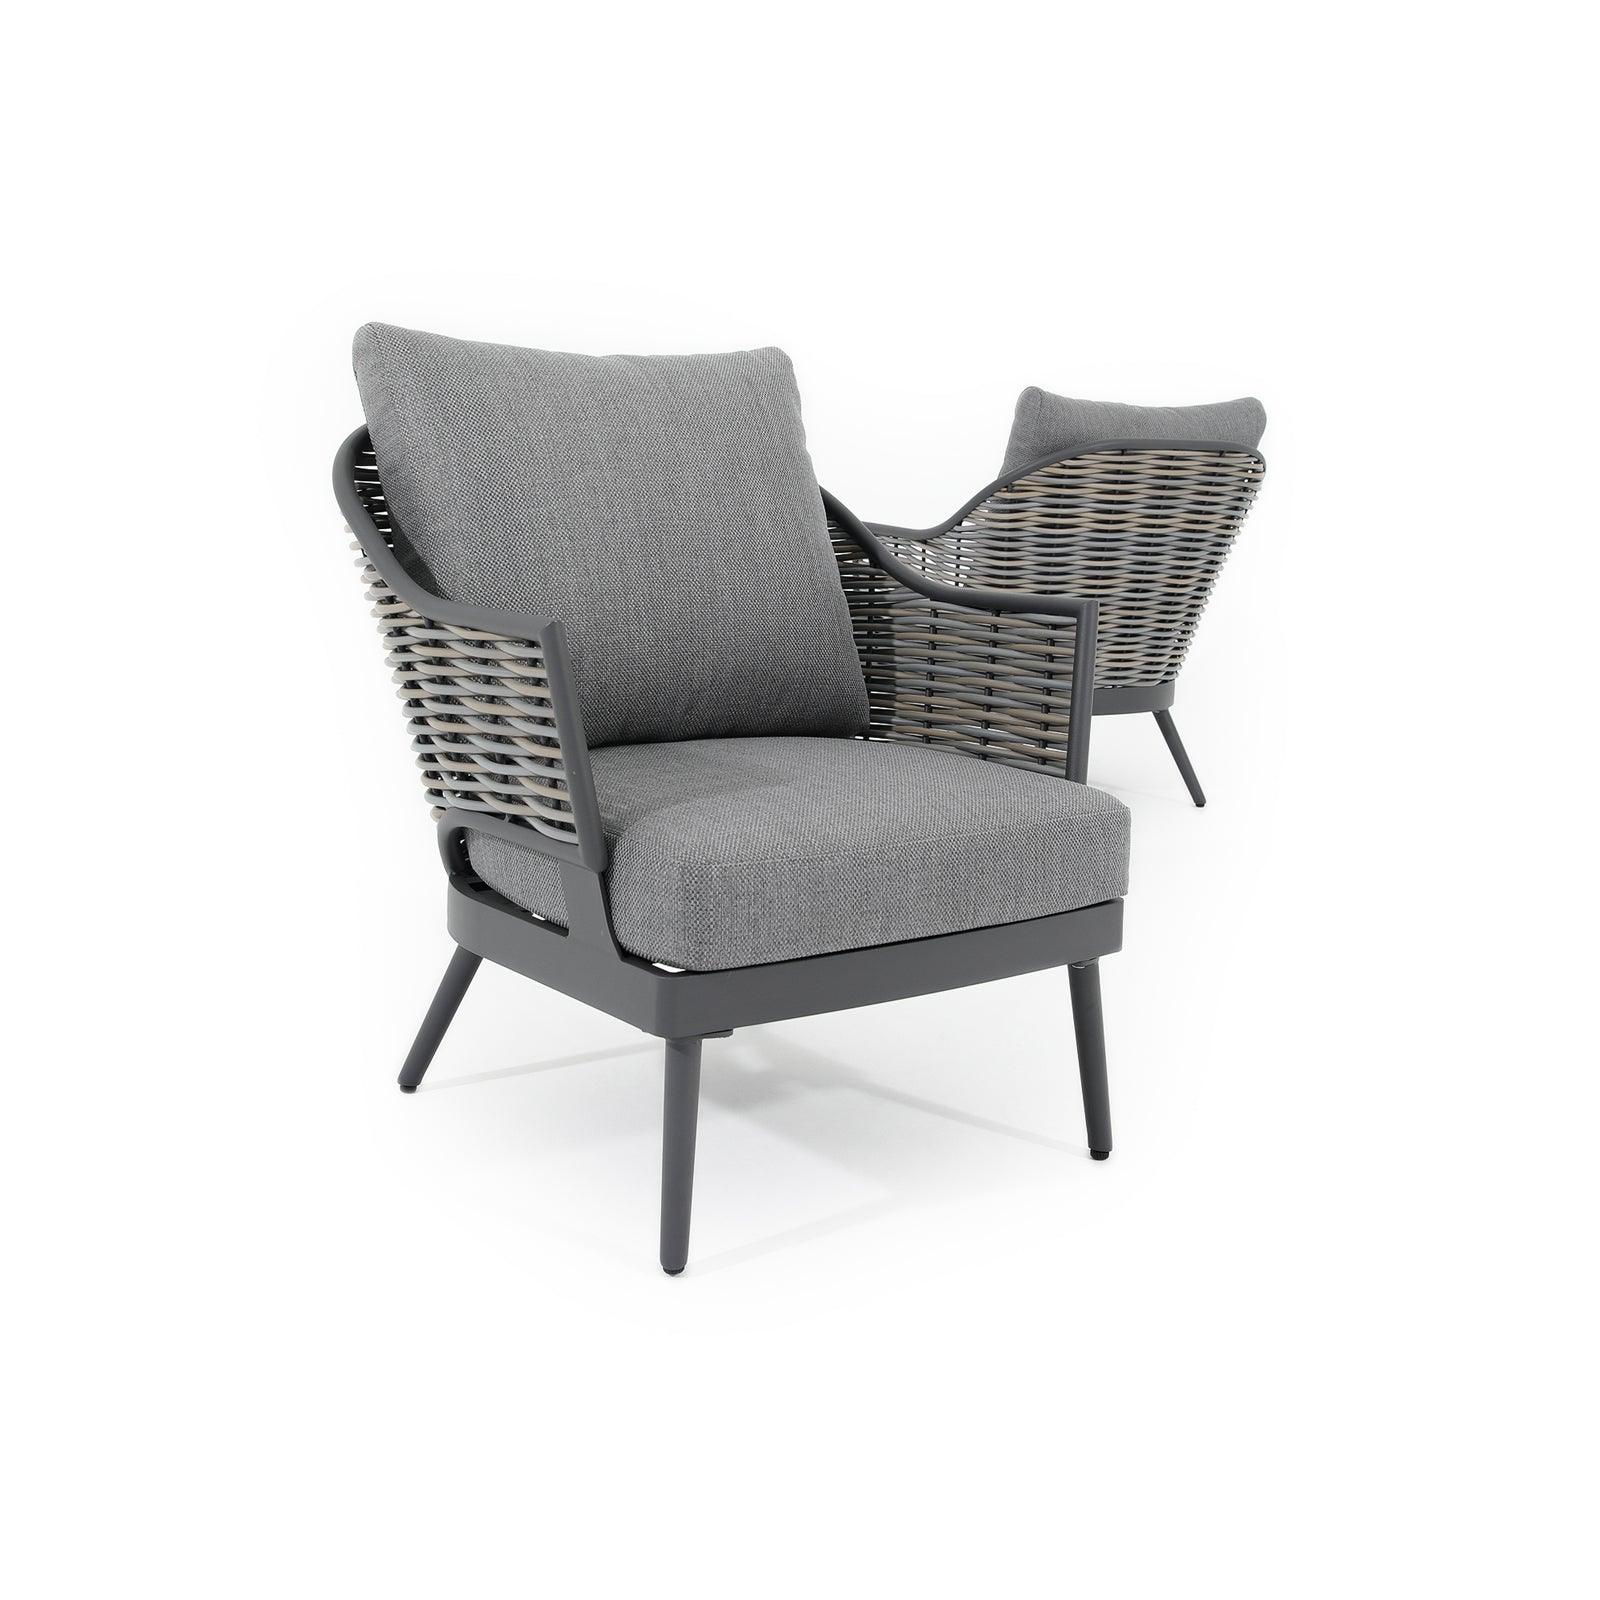 Burano Grey wicker outdoor armchairs with aluminum frame, grey cushions, one for left view, one for back view - Jardina Furniture